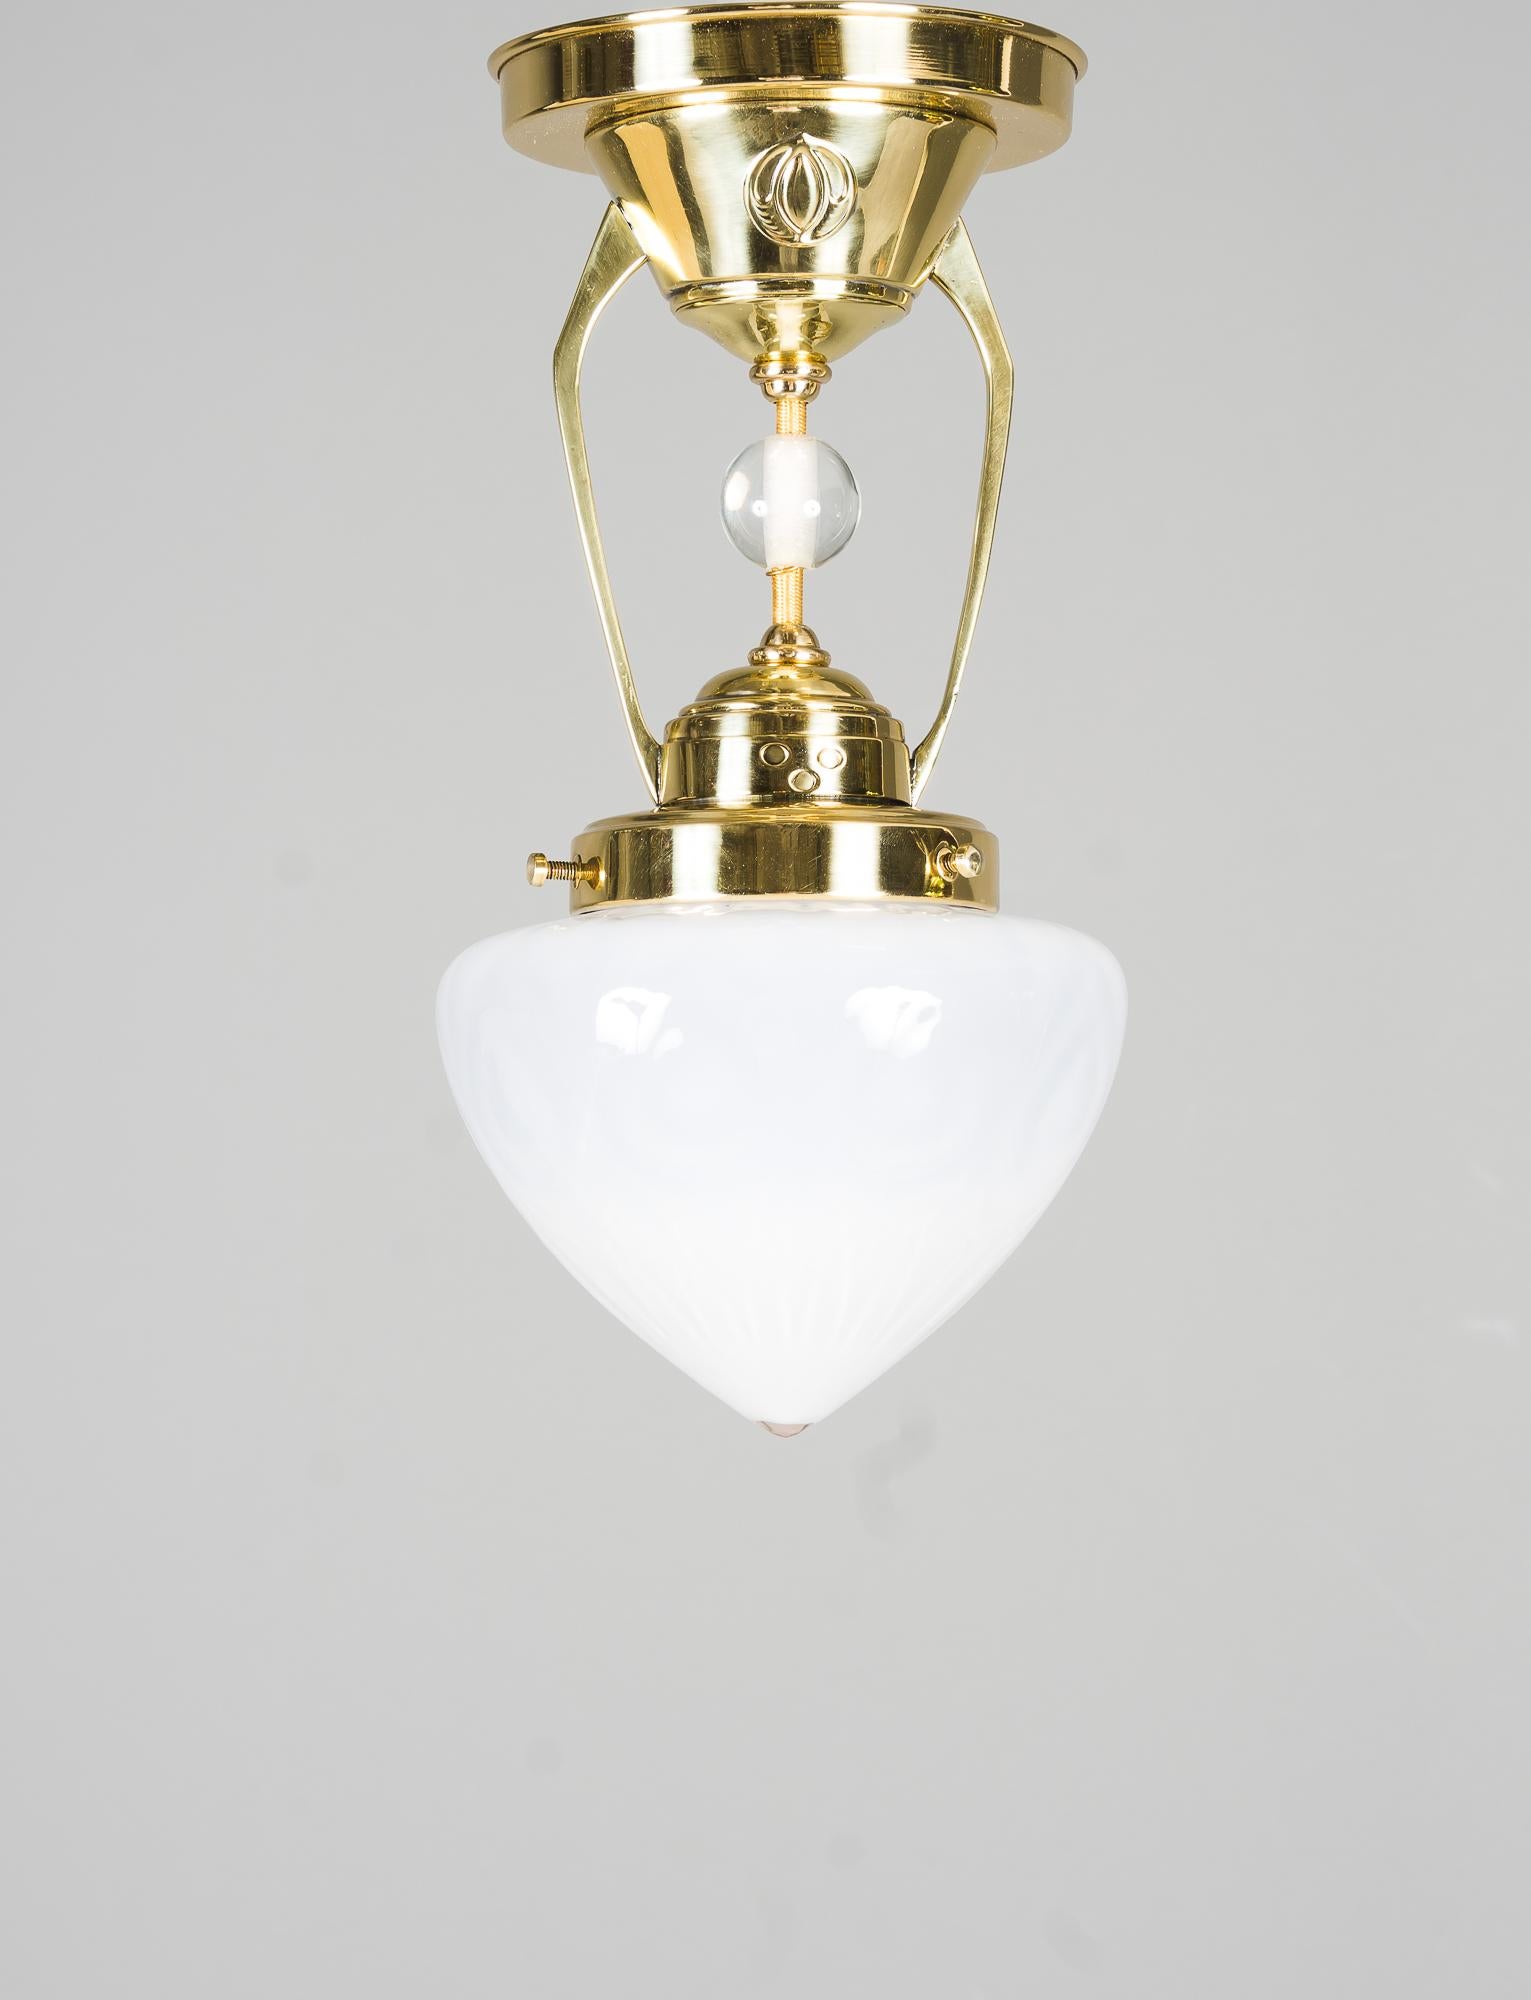 Art Deco ceiling lamp around 1920s
Polished and stove enamelled
Original opaline glass shade.